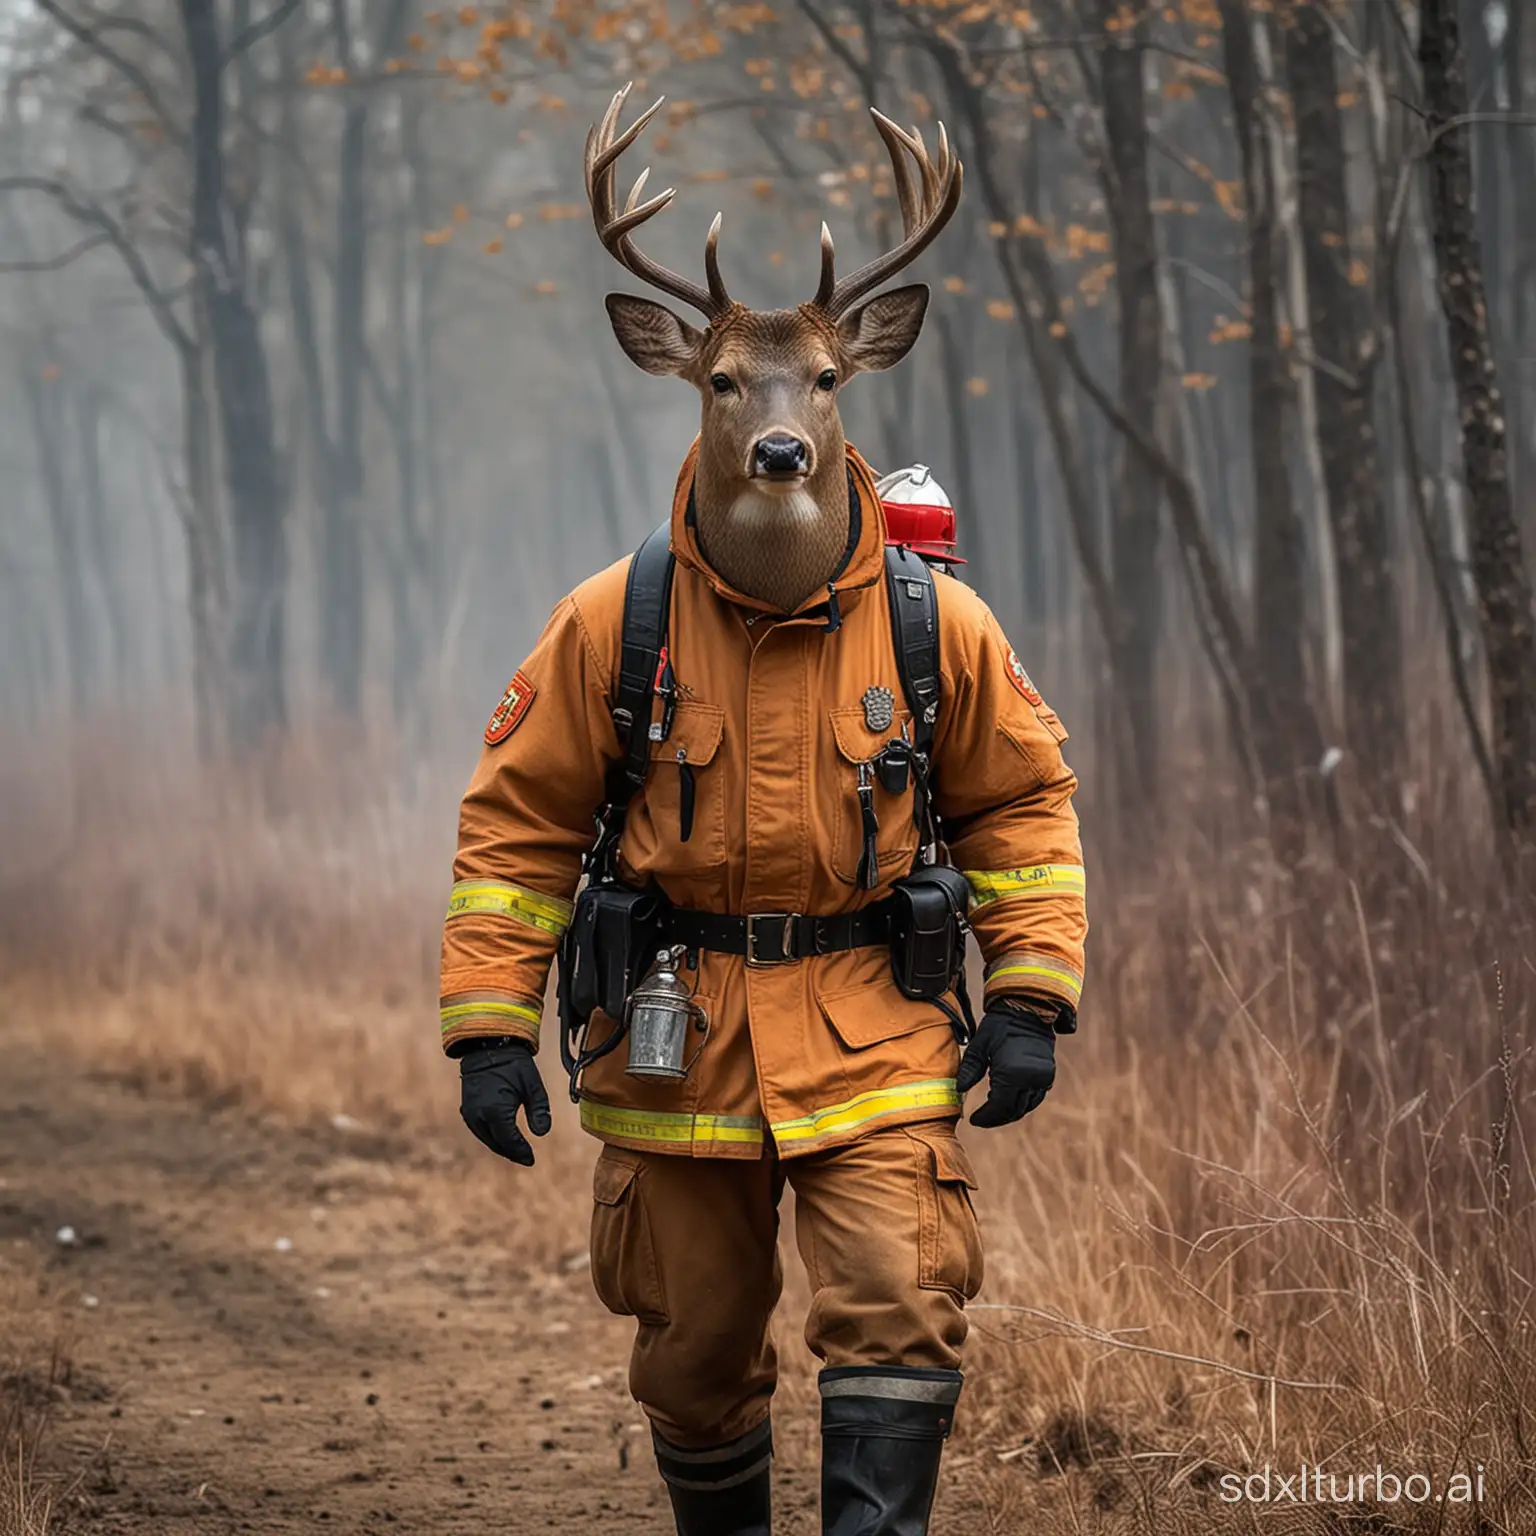 A deer in the form of a firefighter